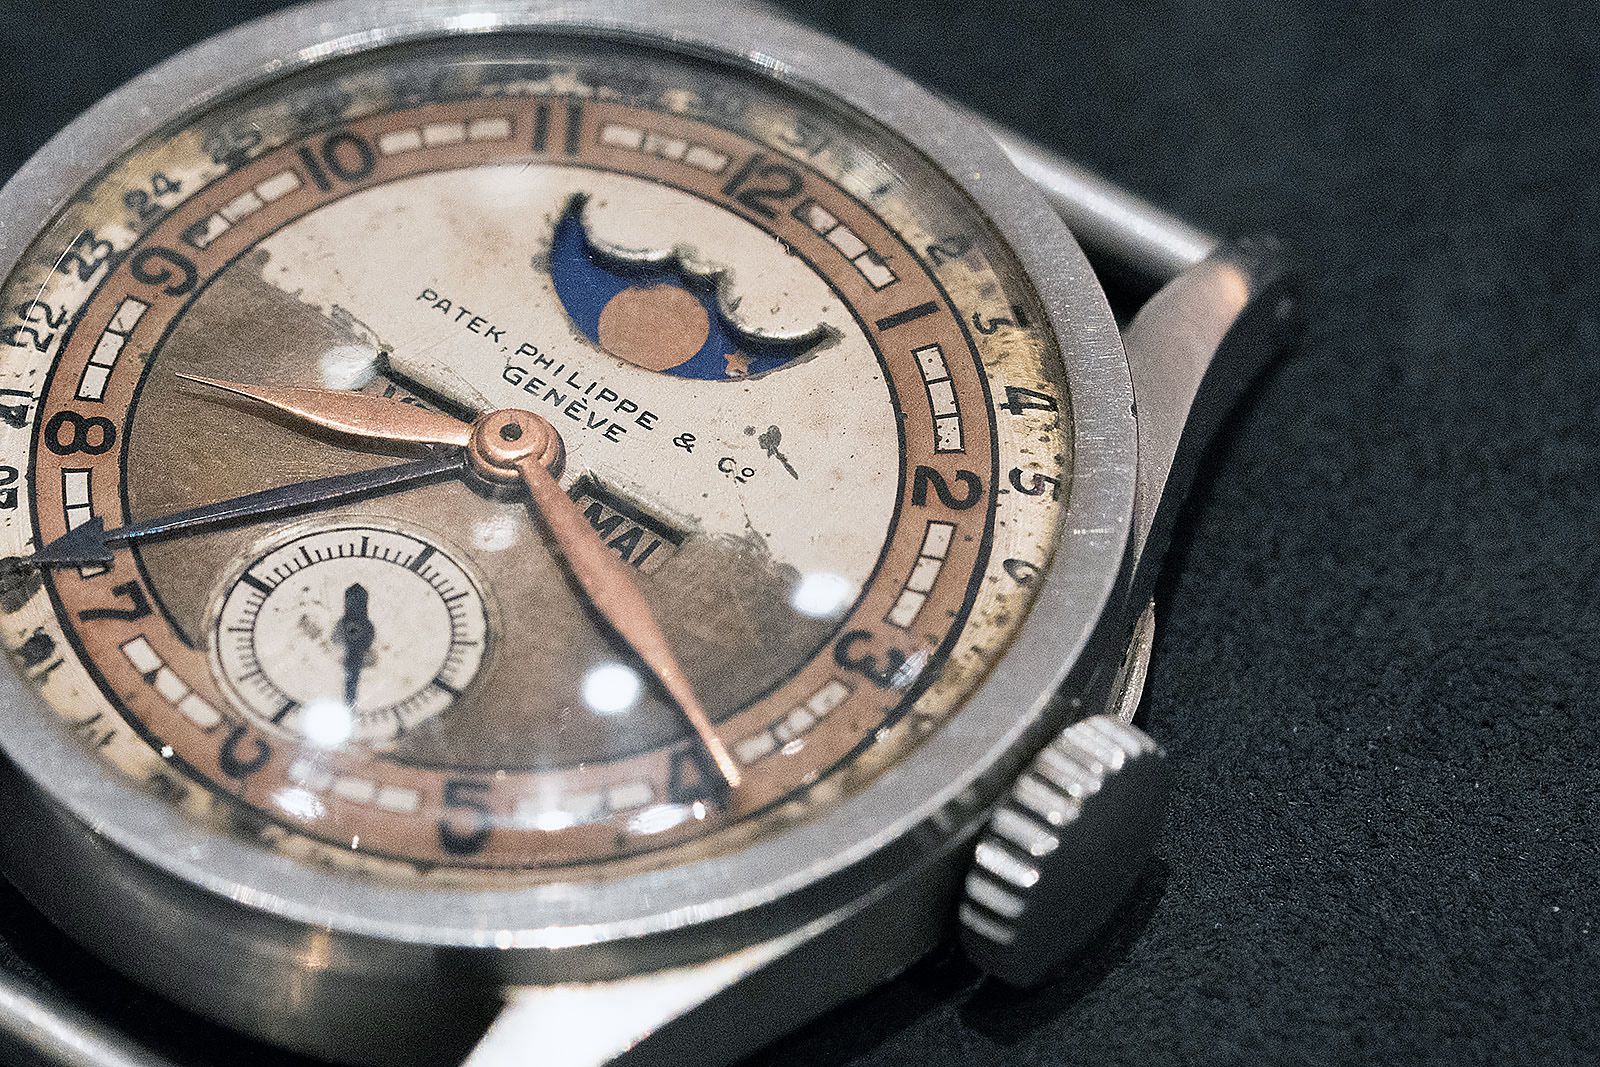 The Intrigue & Significance of the Patek Philippe Owned by the Last ...